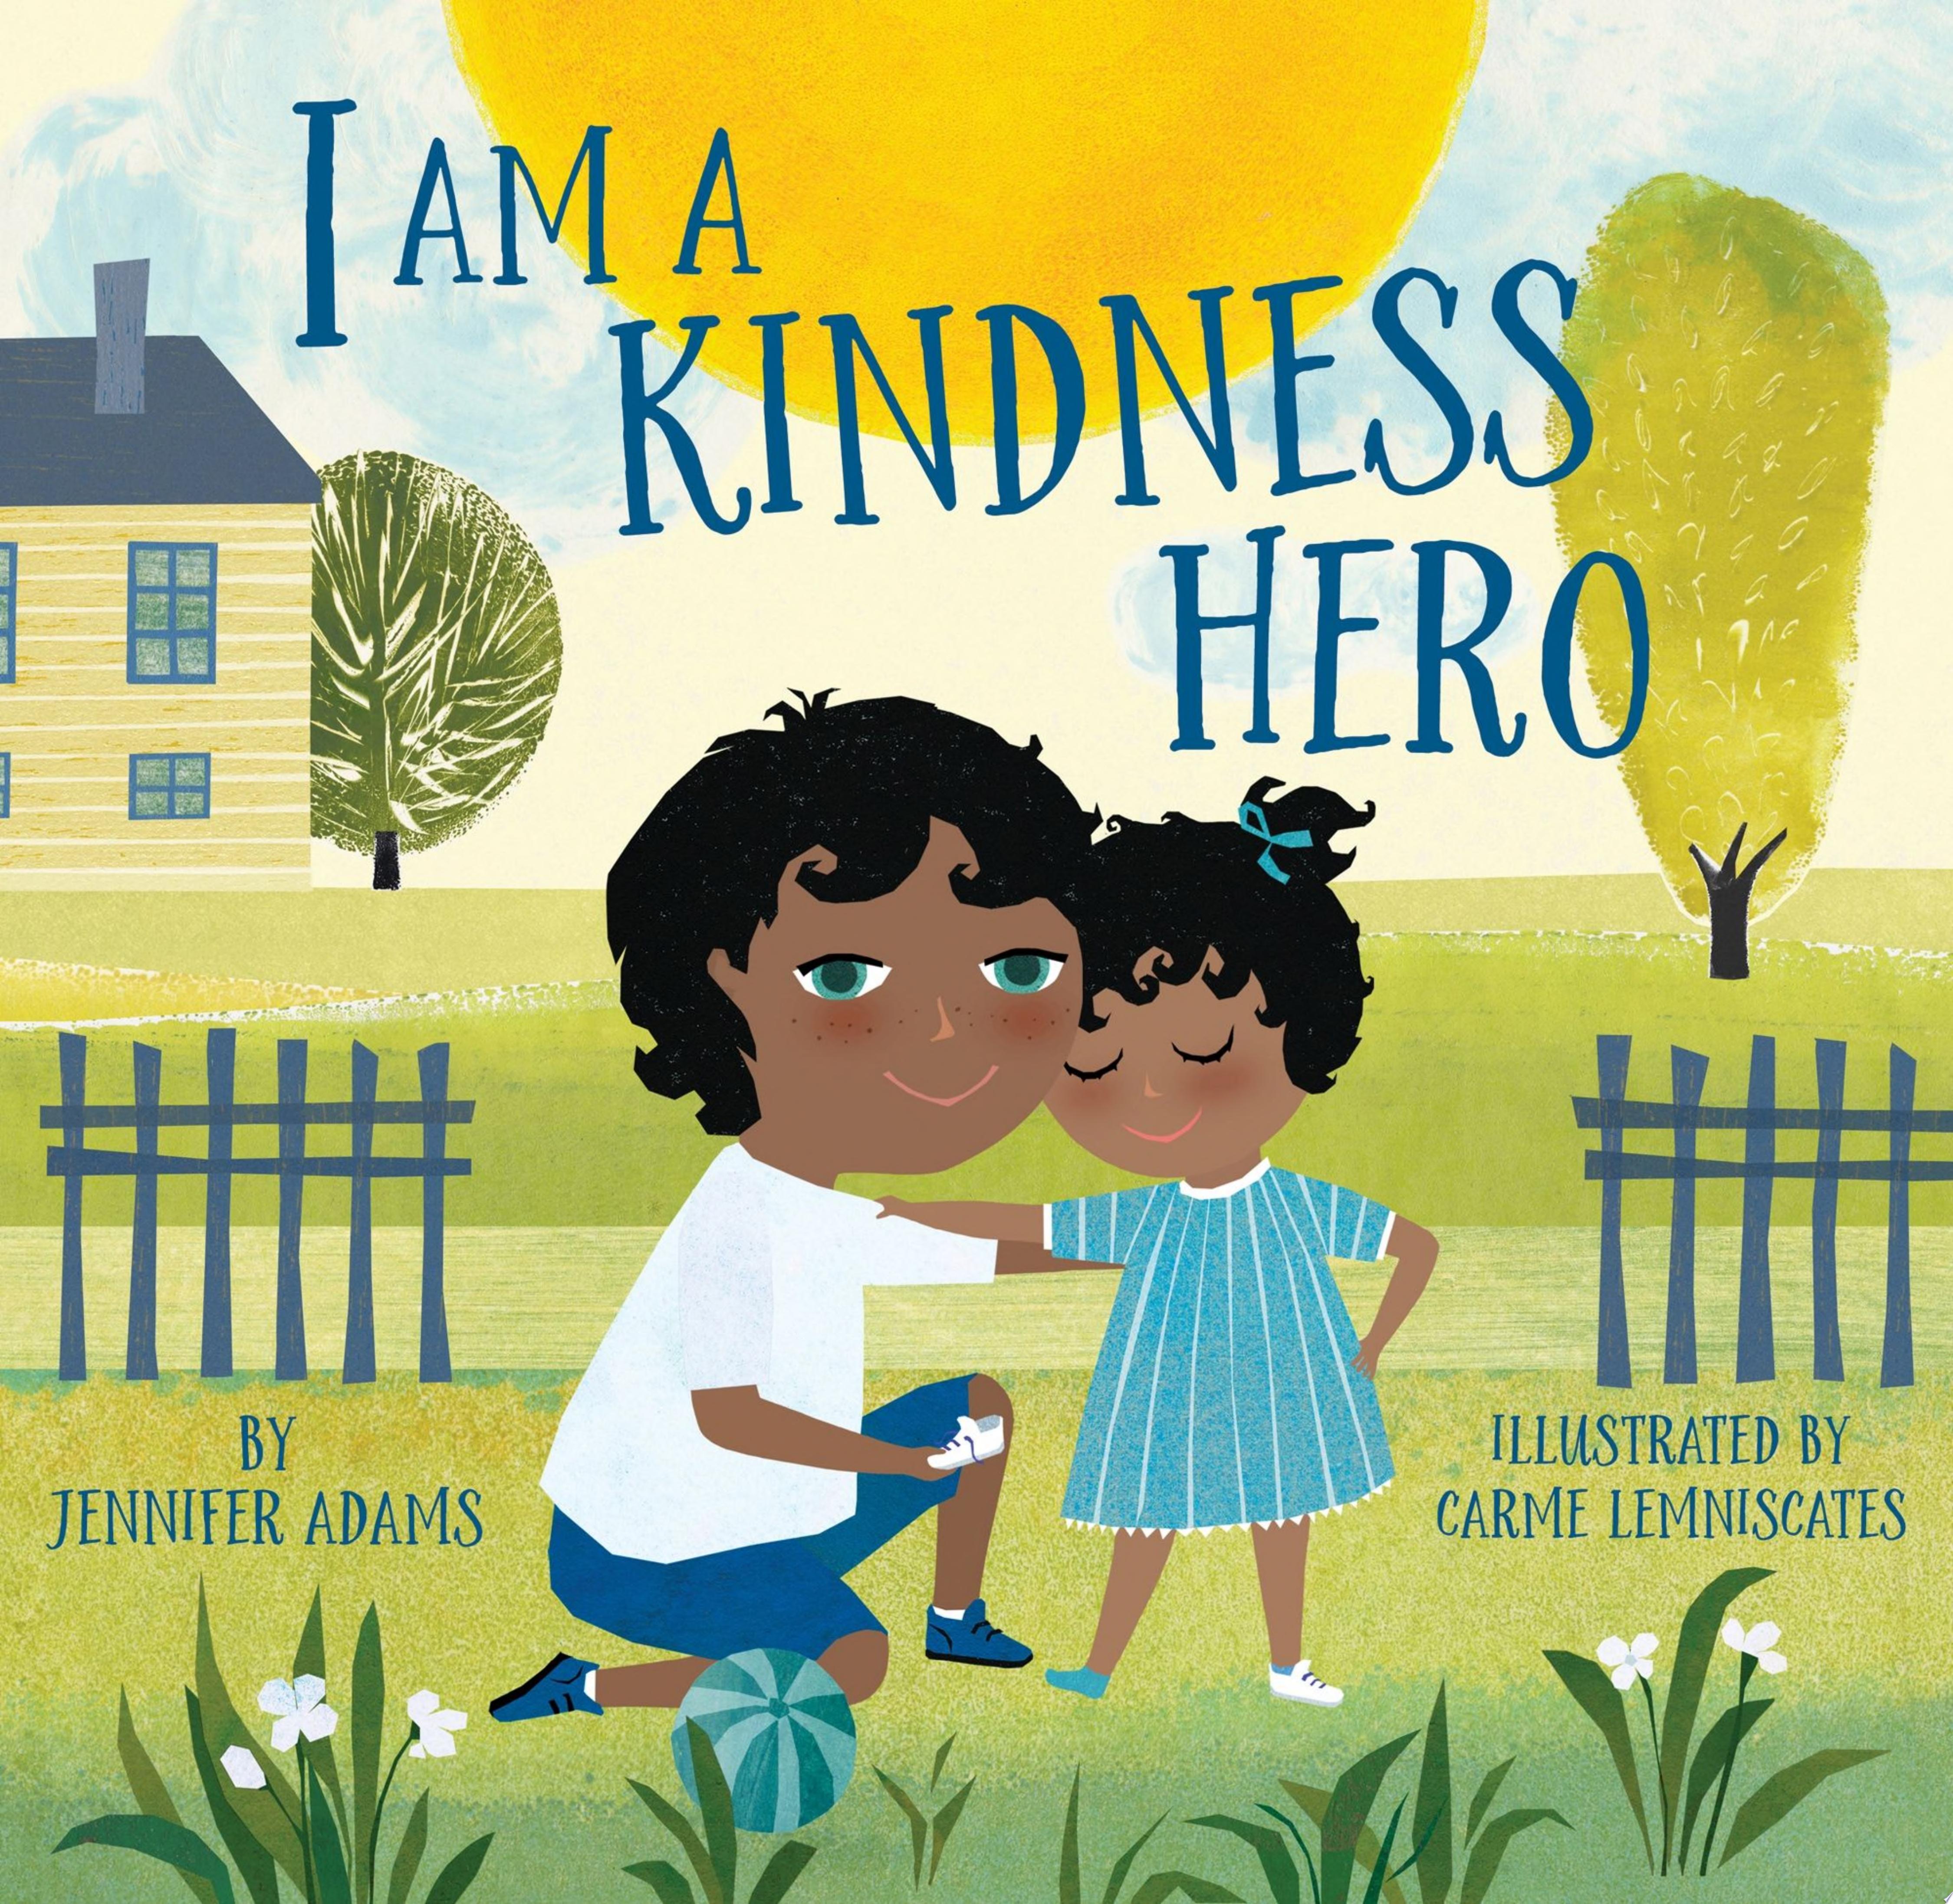 Image for "I Am a Kindness Hero"